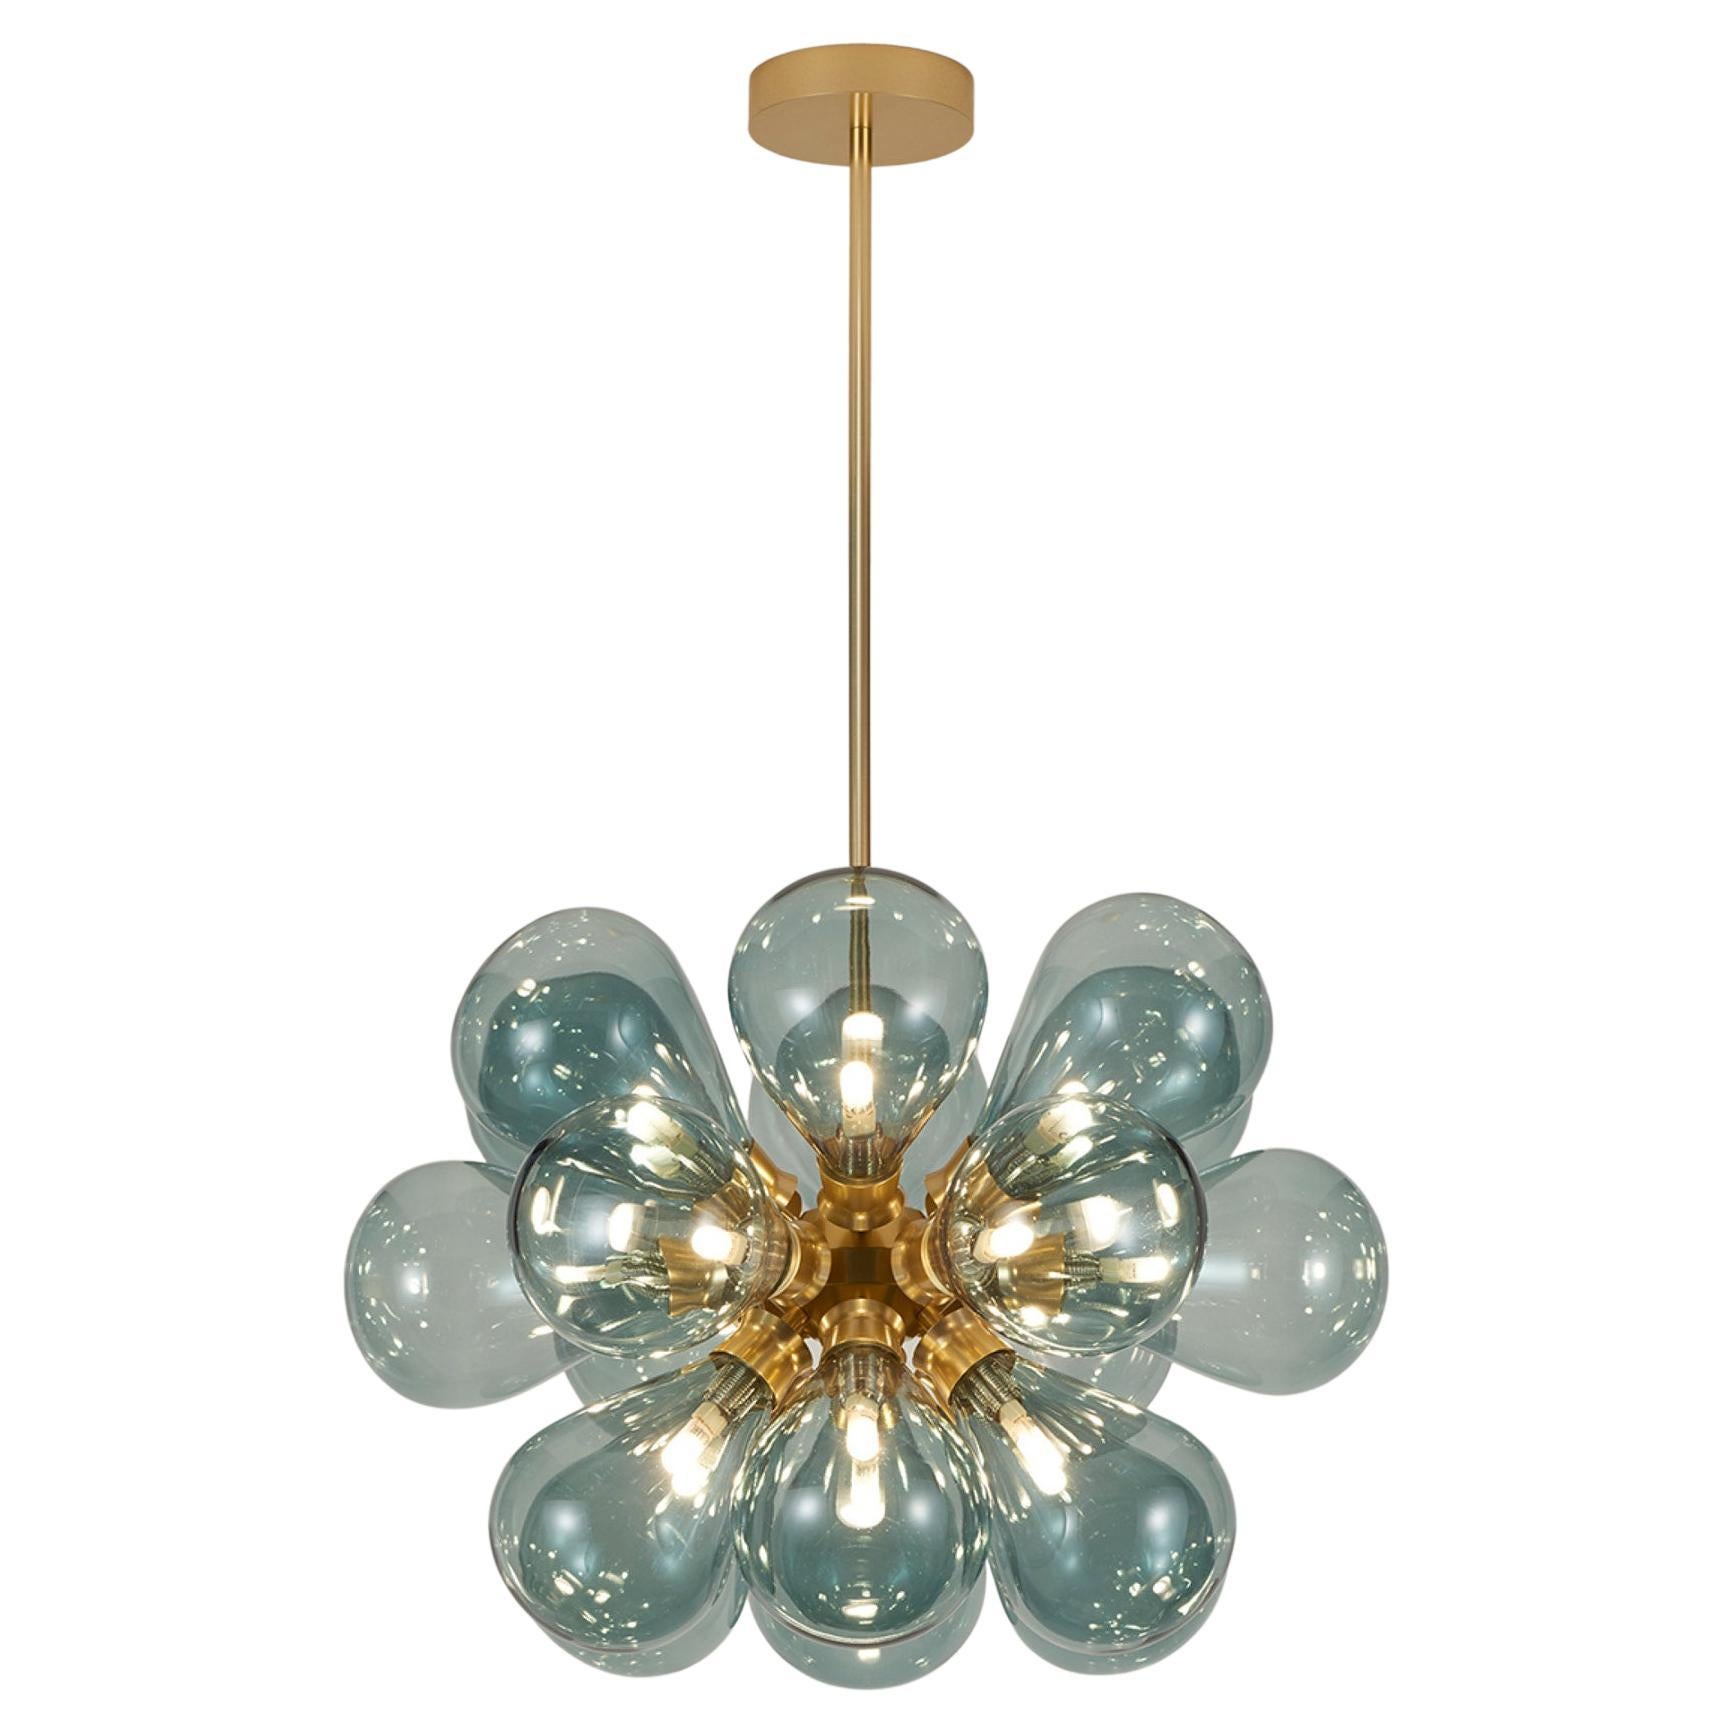 Cintola Maxi Pendant in Satin Gold with 18 Handblown Smoke Grey Glass Globes For Sale